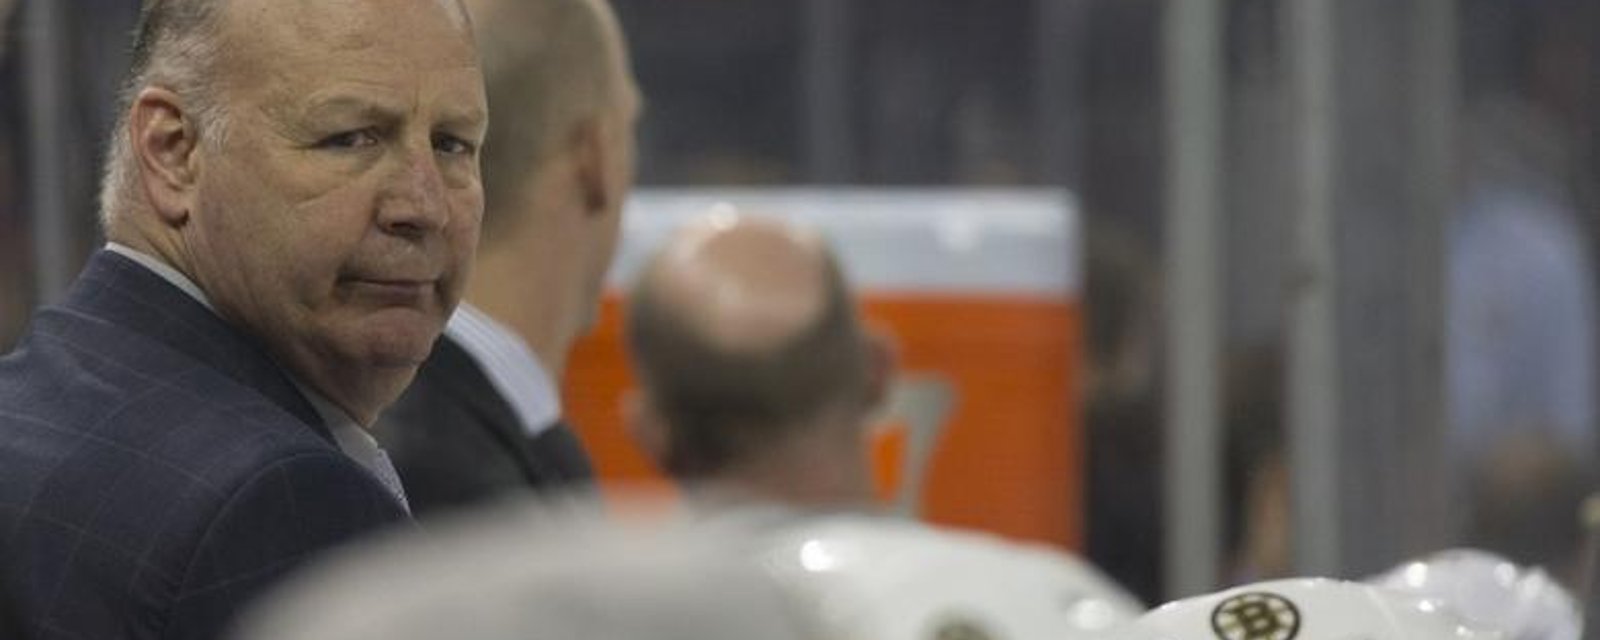 The Bruins have decided on the fate of head coach Claude Julien.